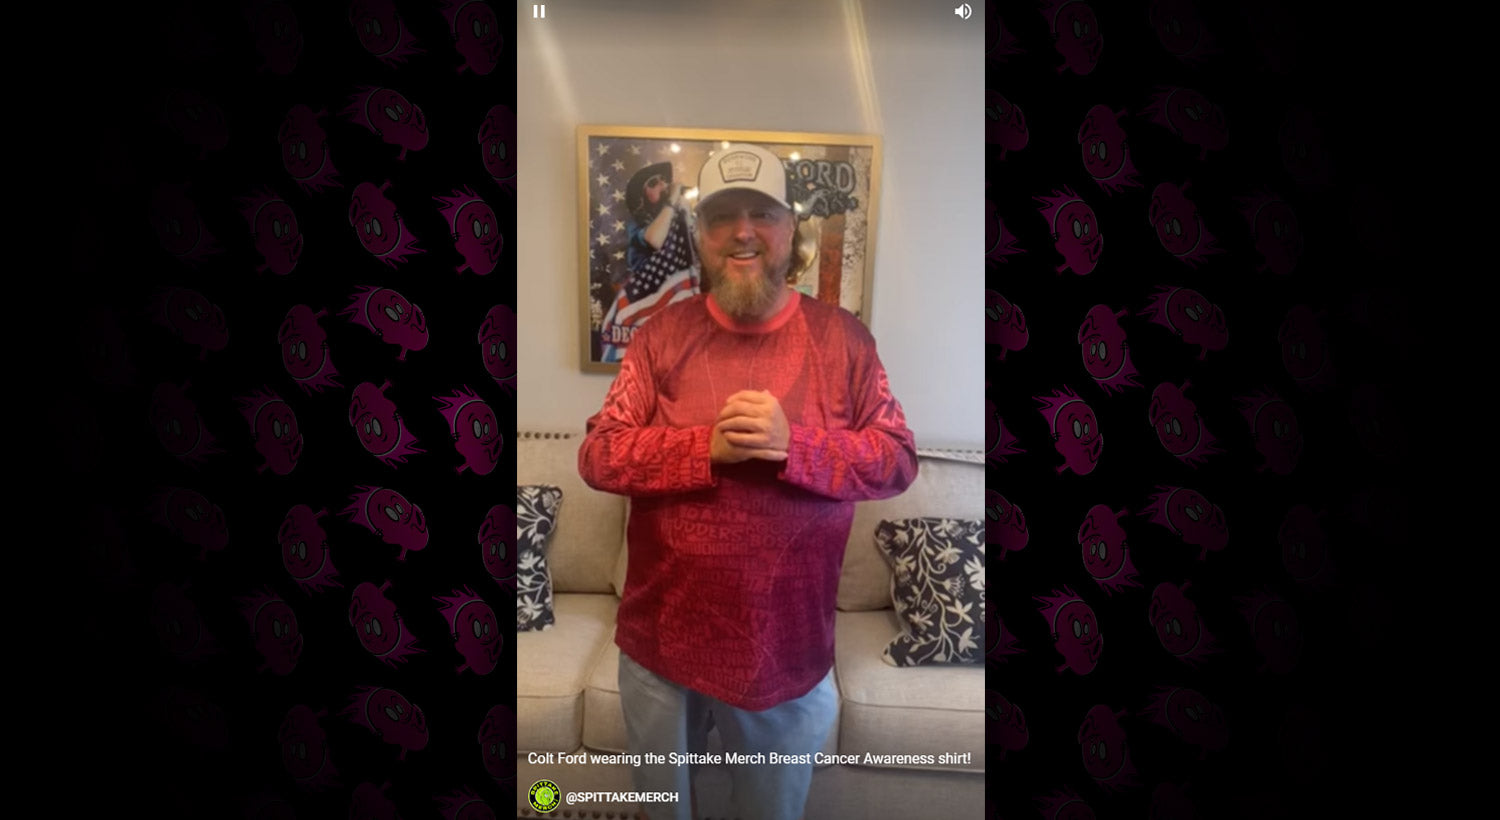 Load video: Colt Ford wearing the SP!TTAKE MERCH Breast Cancer Awareness long sleeve shirt